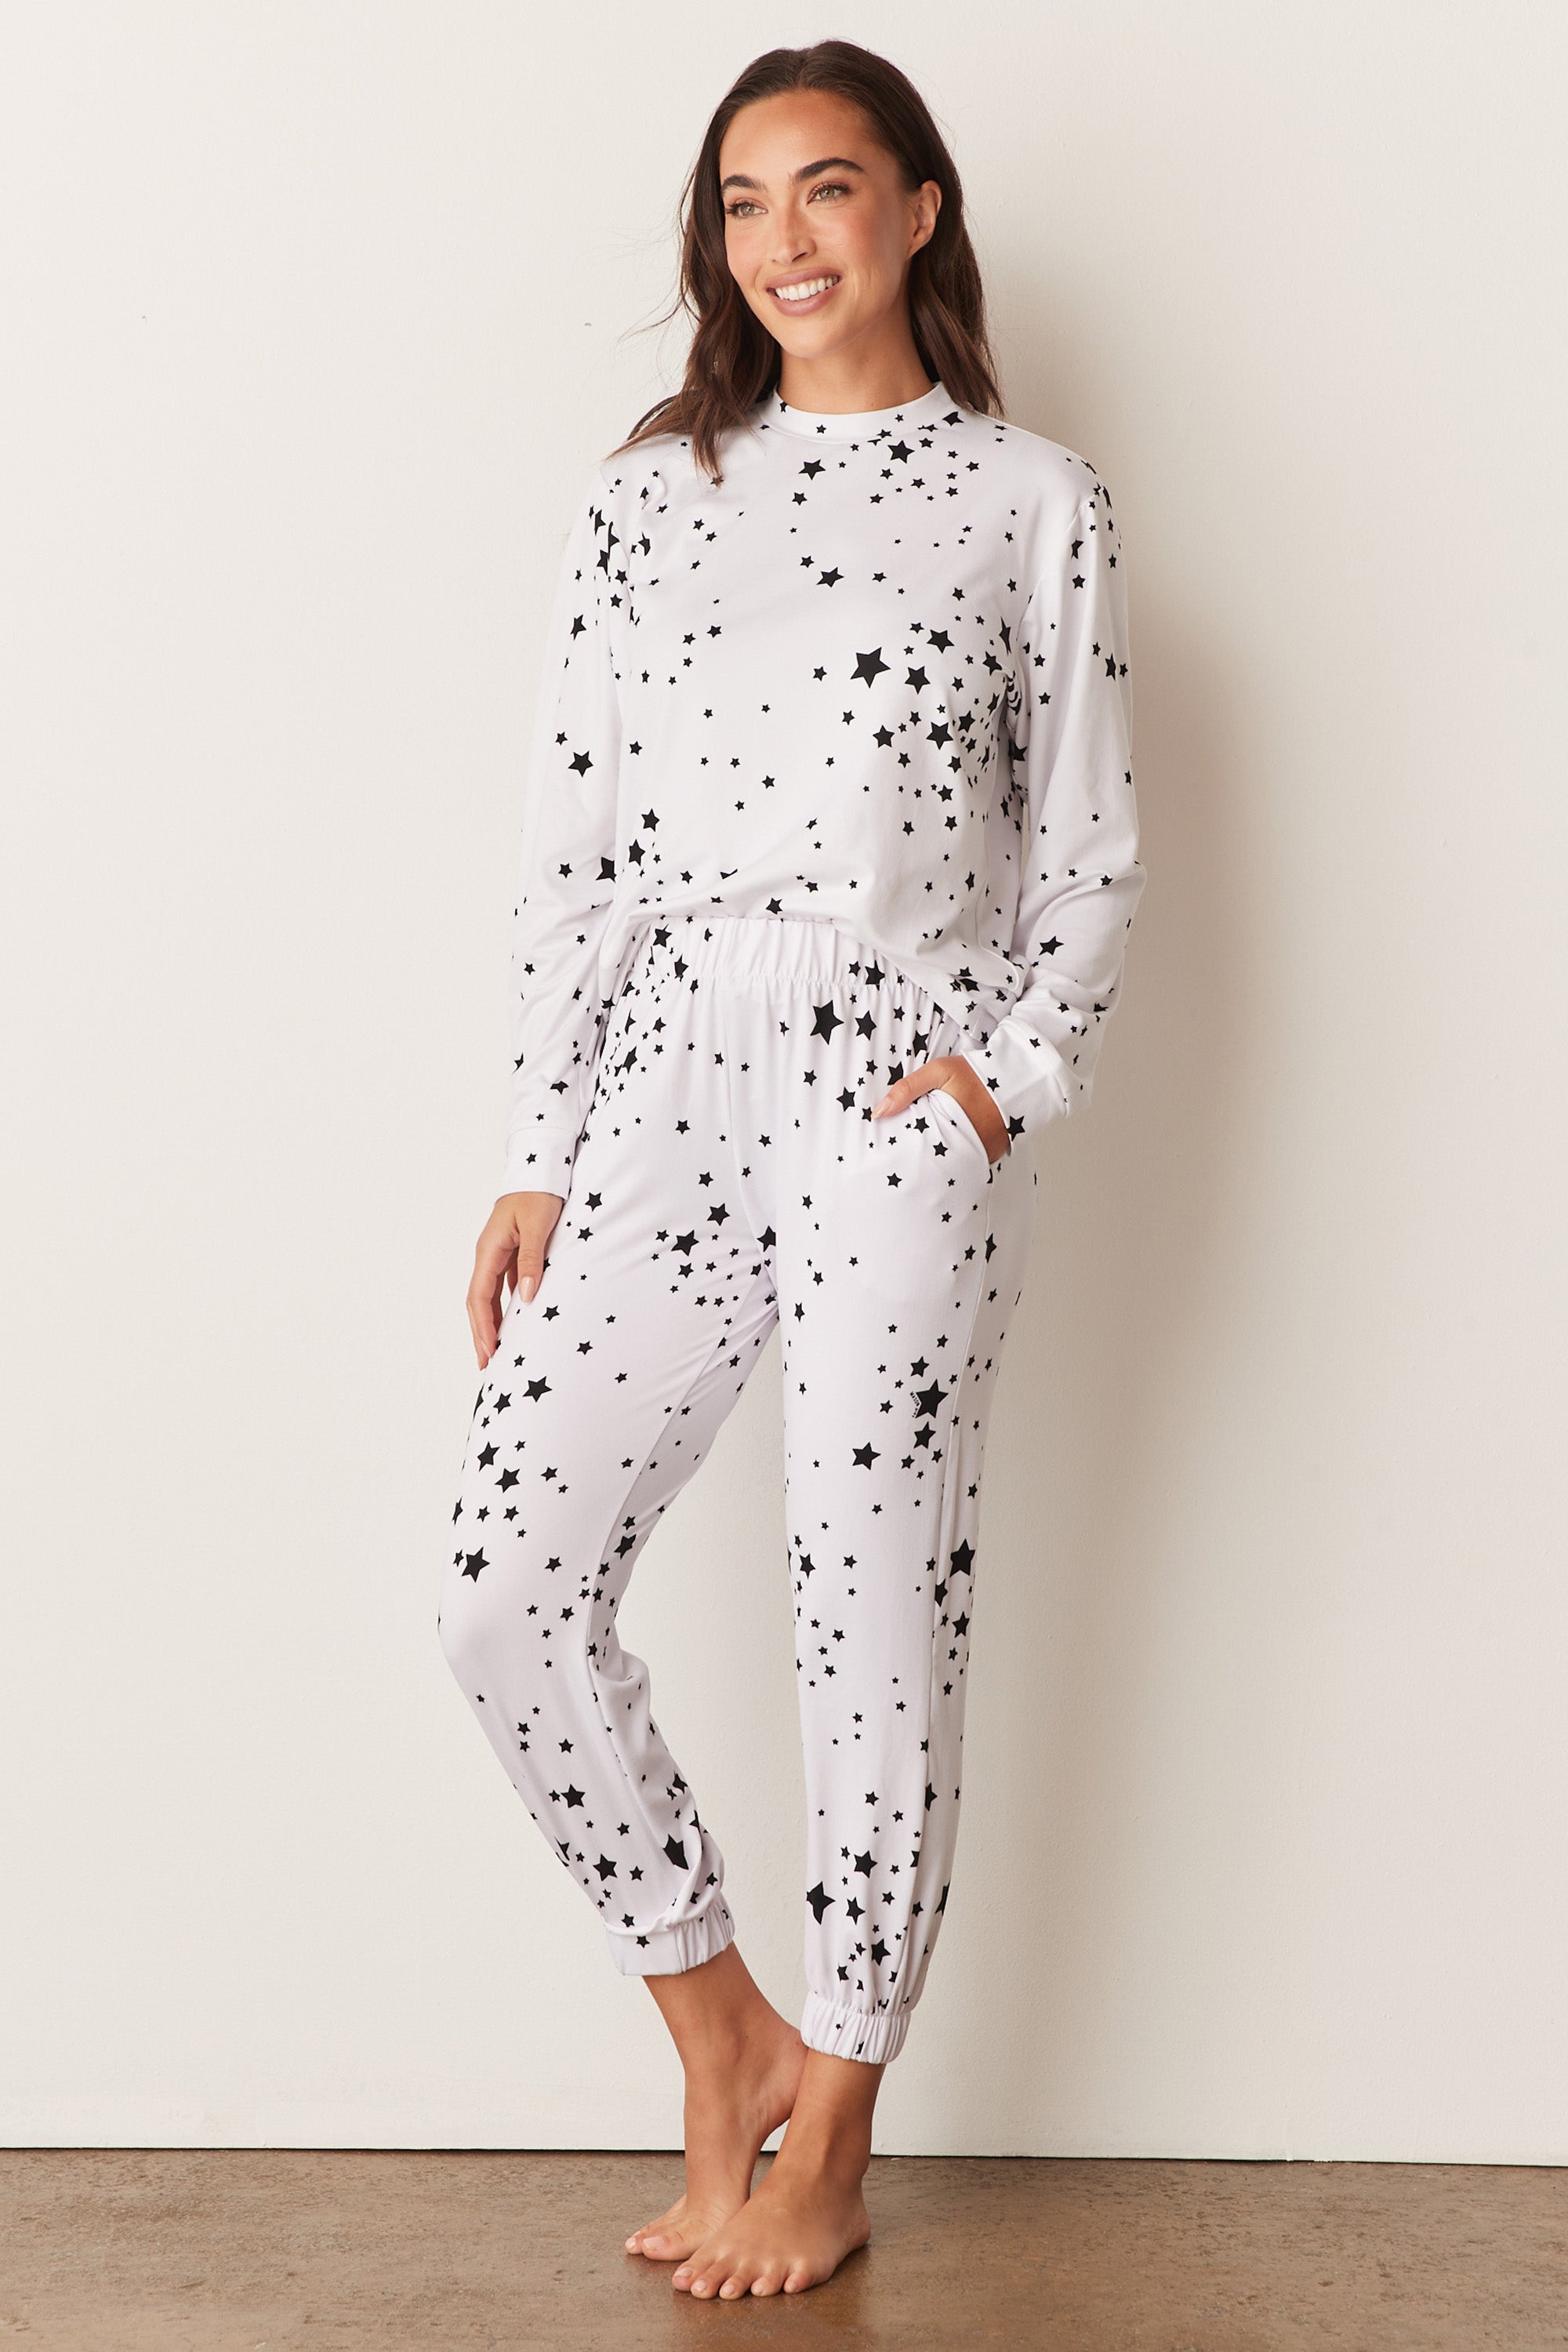 Load image into Gallery viewer, PARKER CREWNECK | BRIGHT WHITE STARS
